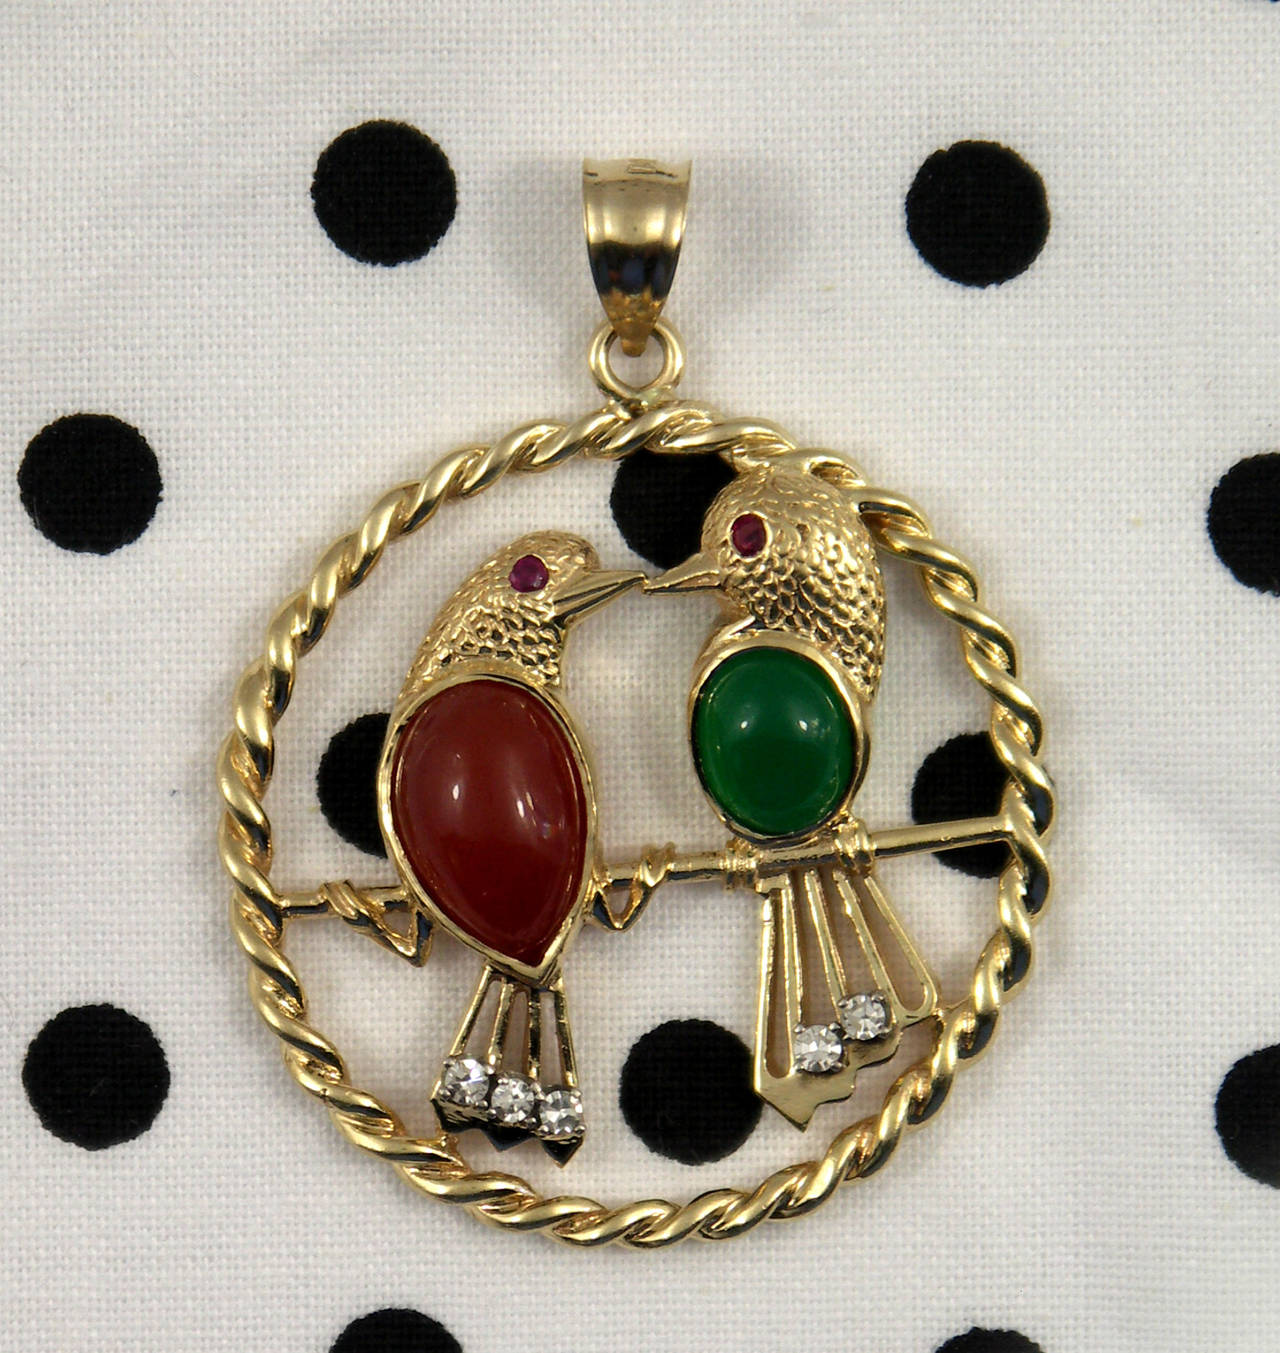 A 14K yellow gold pendant featuring two lovebirds, one set with a carnelian belly, the other with a chrysoprase belly. Each bird has a ruby eye, and one is set with three diamonds in the tail, while the other has two diamonds, for a total